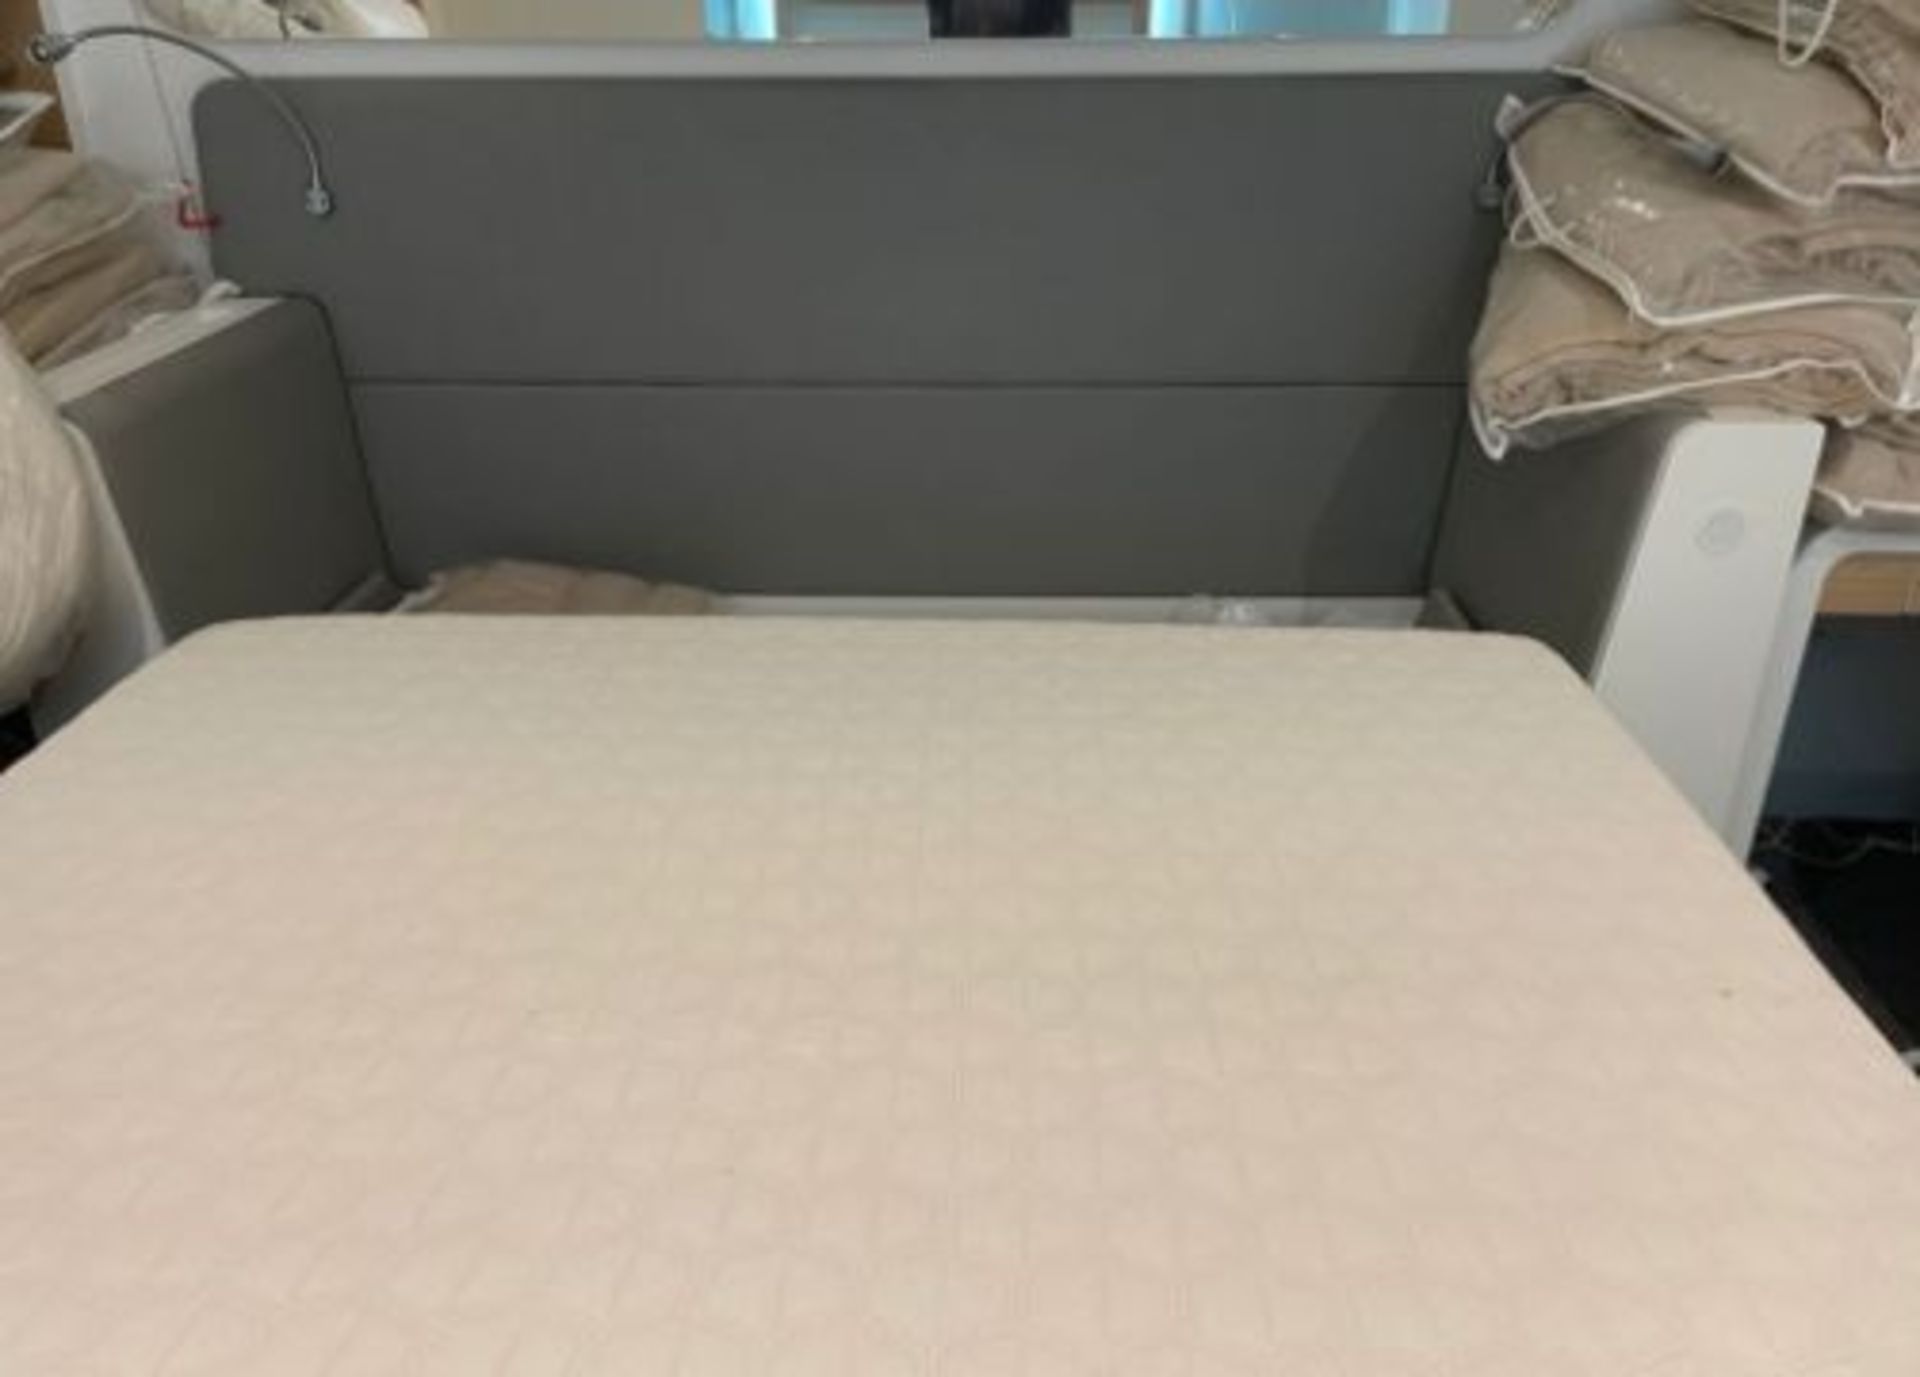 1 x Double Adjustable Space Saving Smart Bed With Serta Motion Memory Foam Mattress - Signature - Image 4 of 12